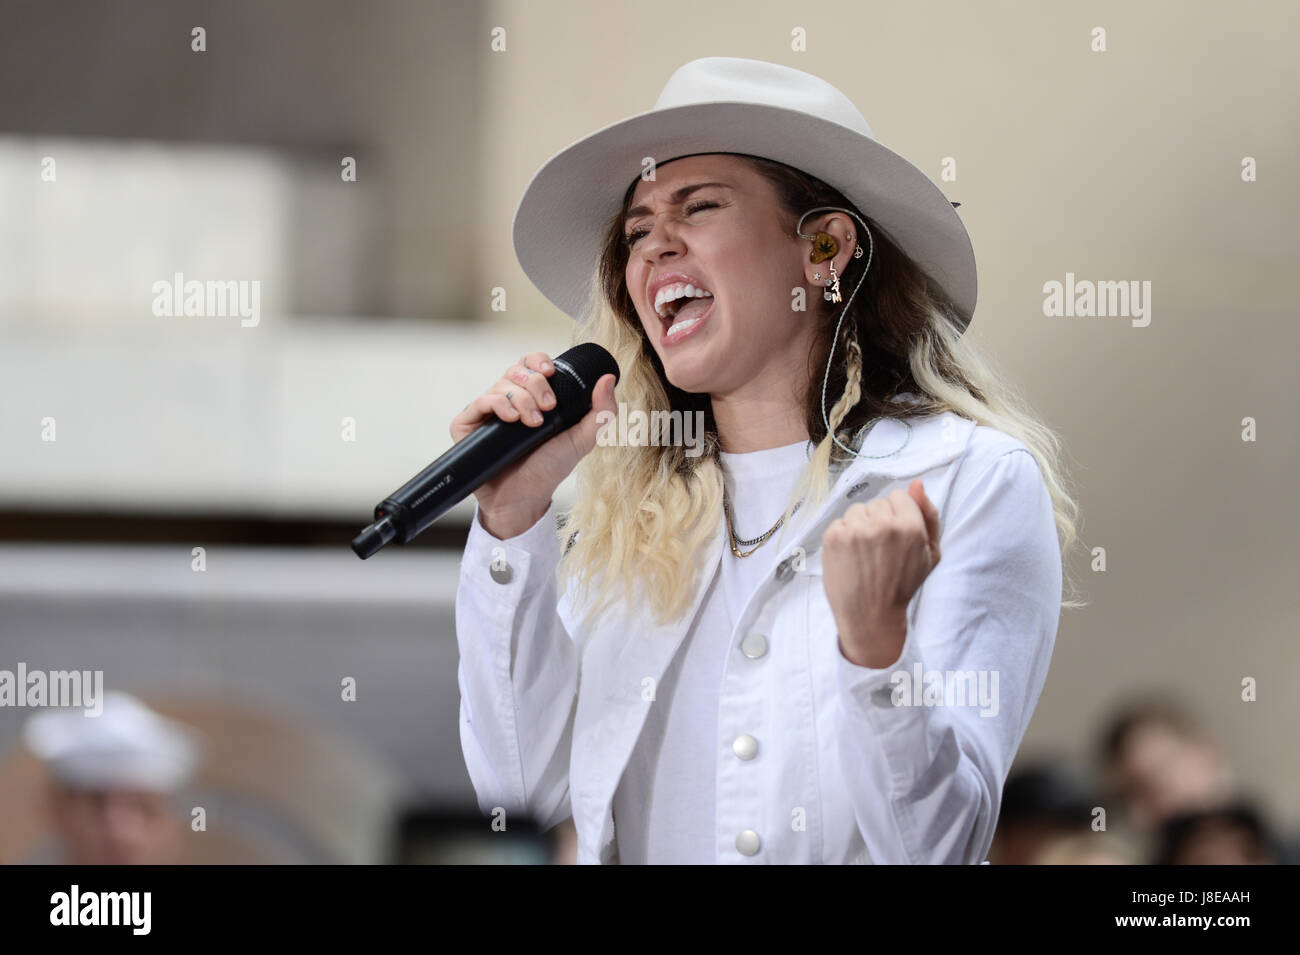 US singer Miley Cyrus performs on stage during NBC's Today show at the Rockefeller Plaza in New York on May 26, 2017. credit: Erik Pendzich Stock Photo